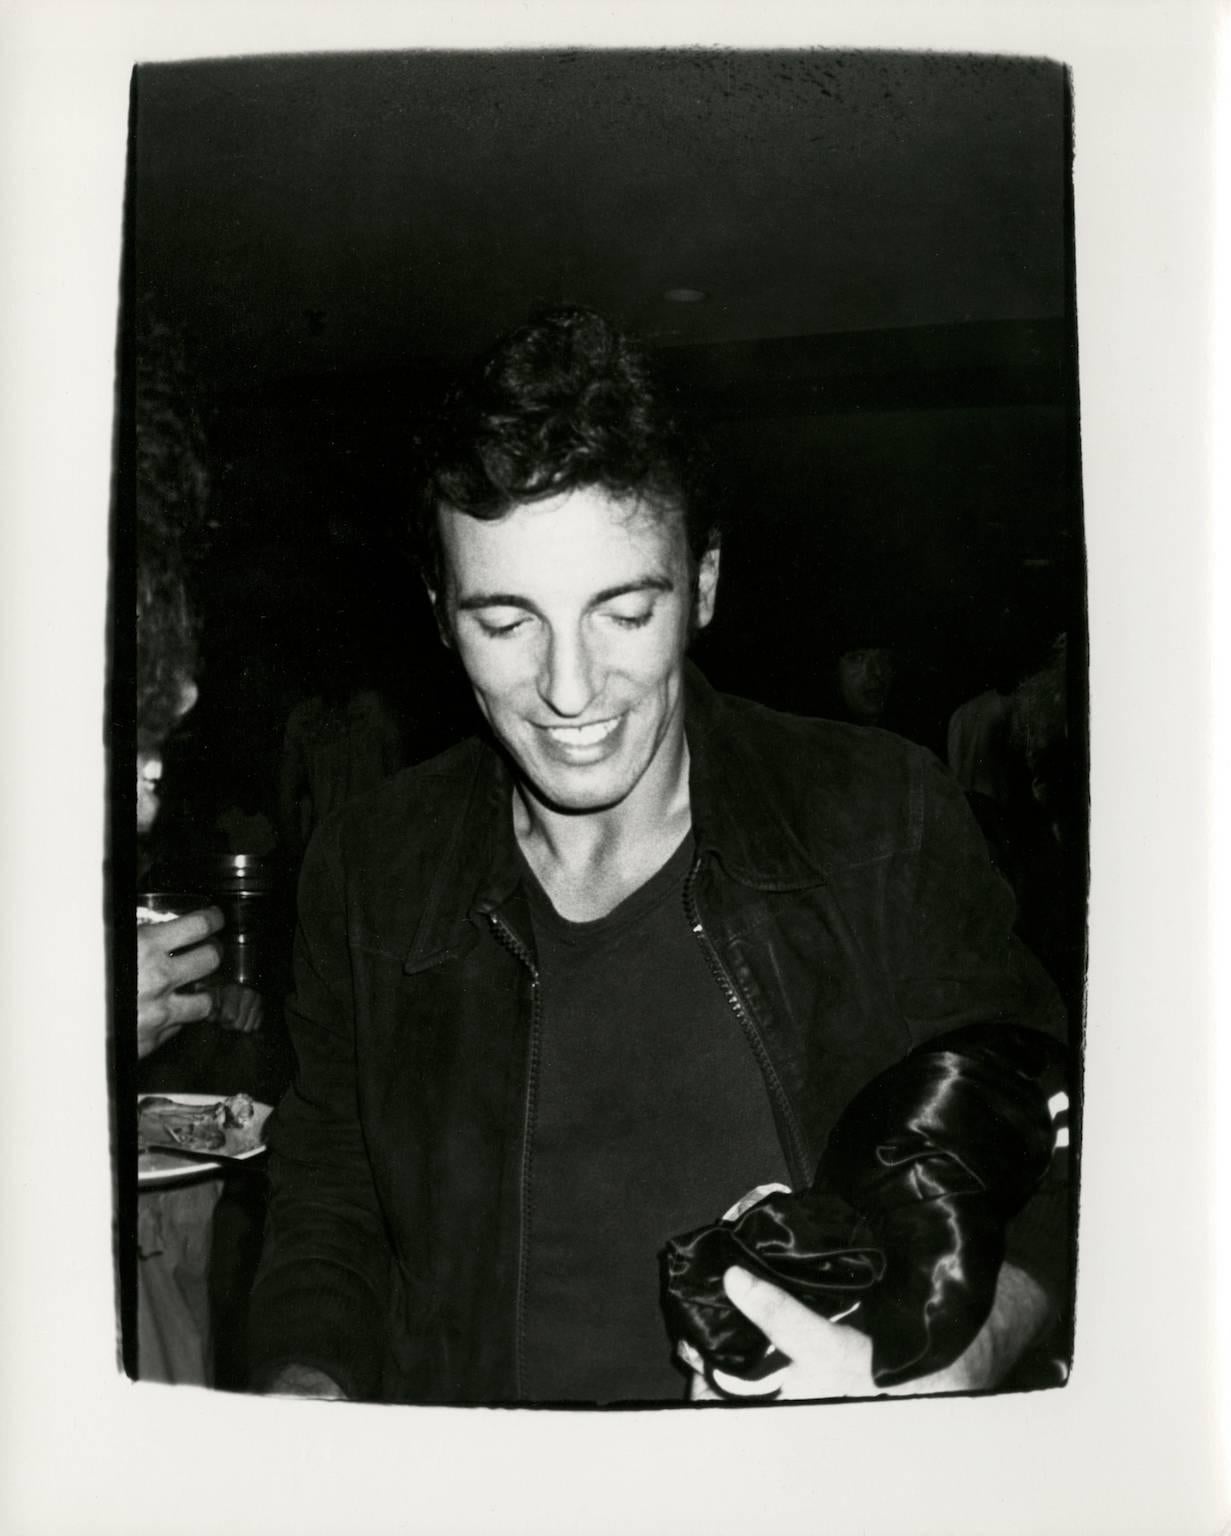 Andy Warhol, Photograph of Bruce Springsteen, 1978